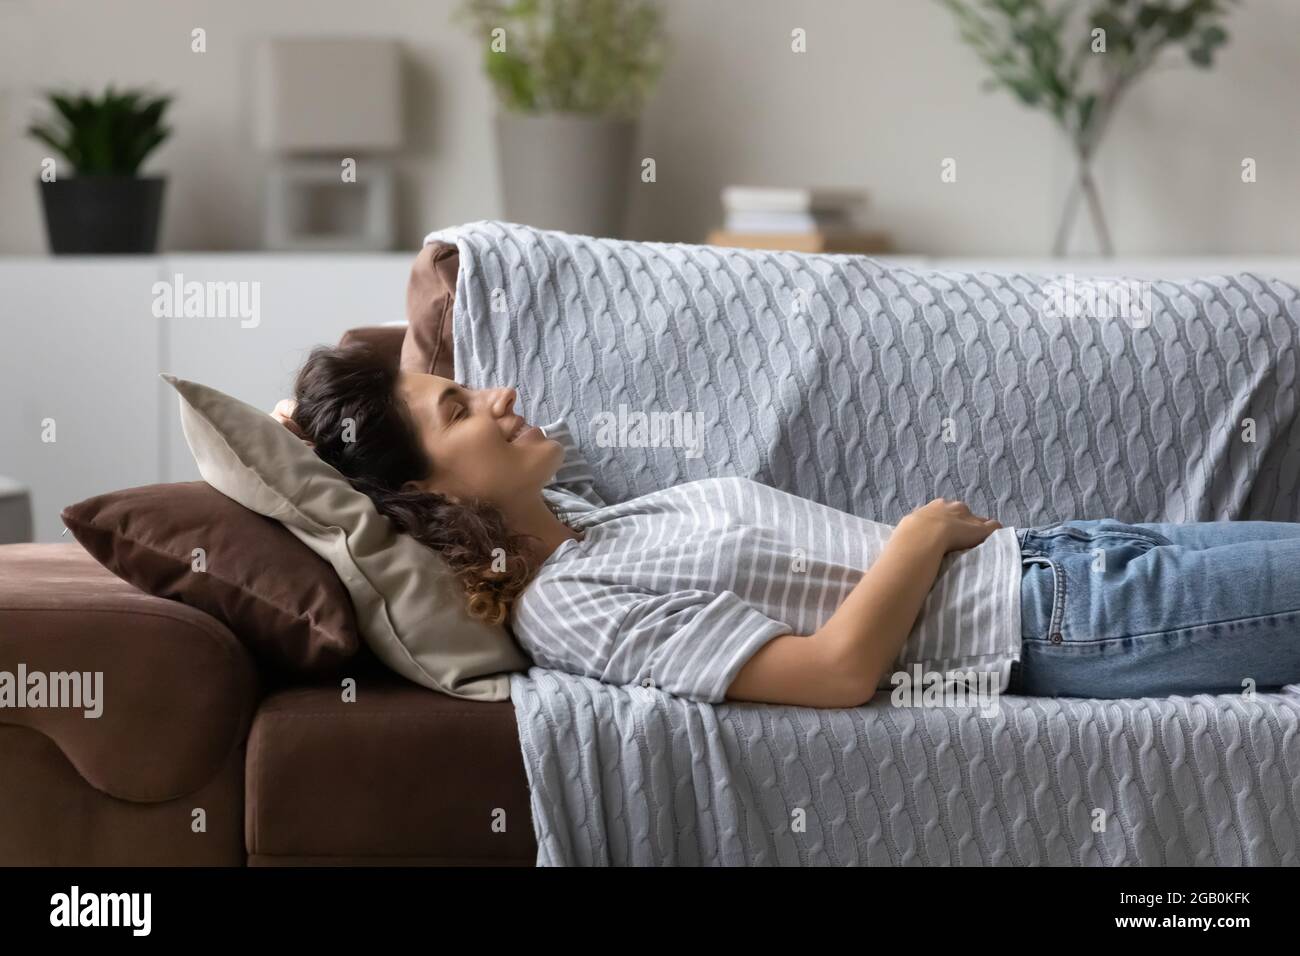 Peaceful young woman resting on cozy sofa in living room Stock Photo